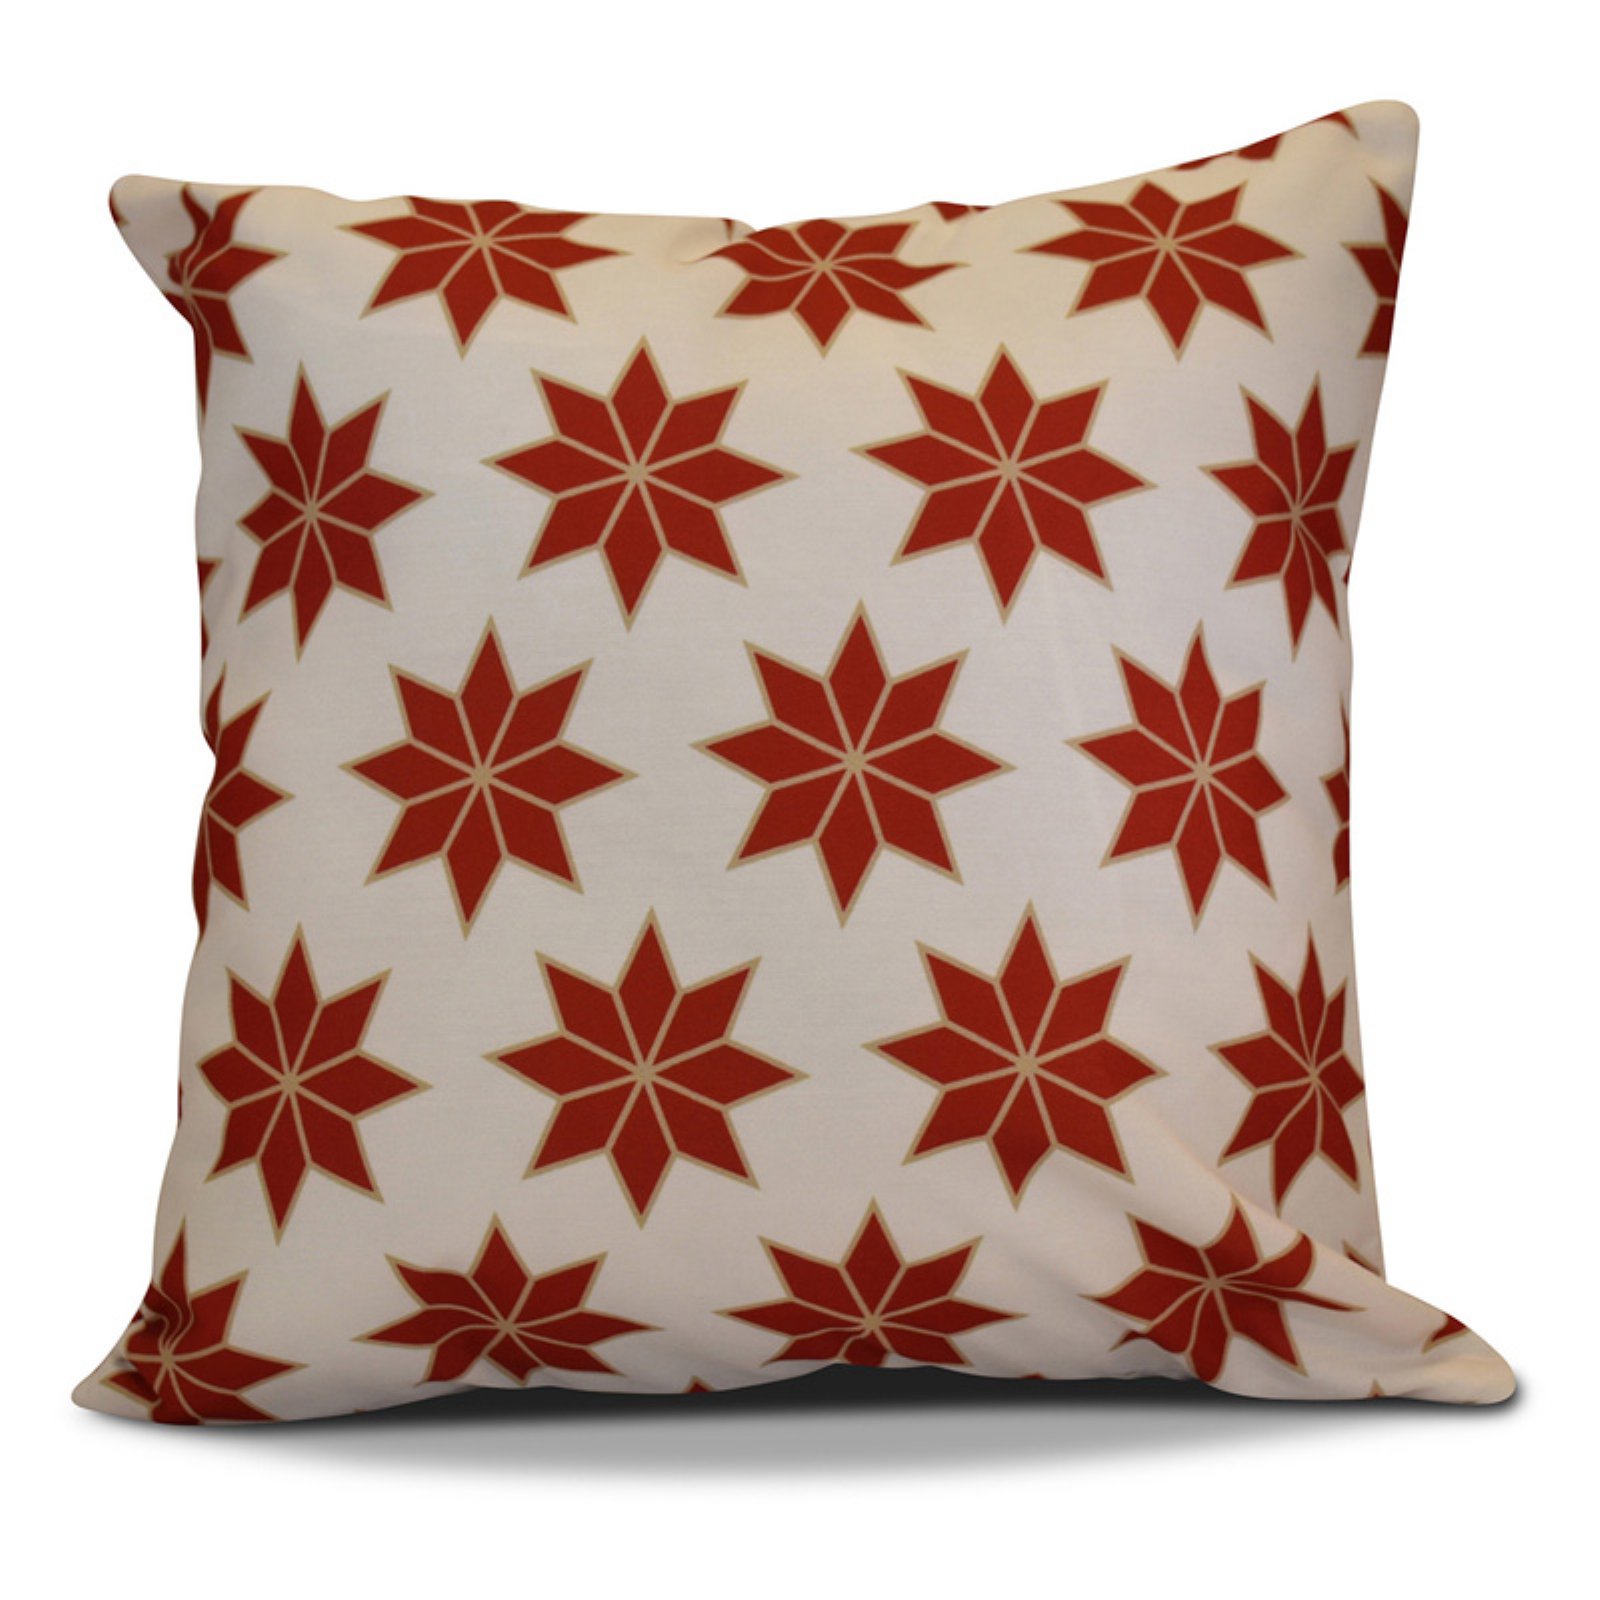 E by Design Holiday Wishes Christmas Stars Geometric Print Outdoor Pillow - image 1 of 10